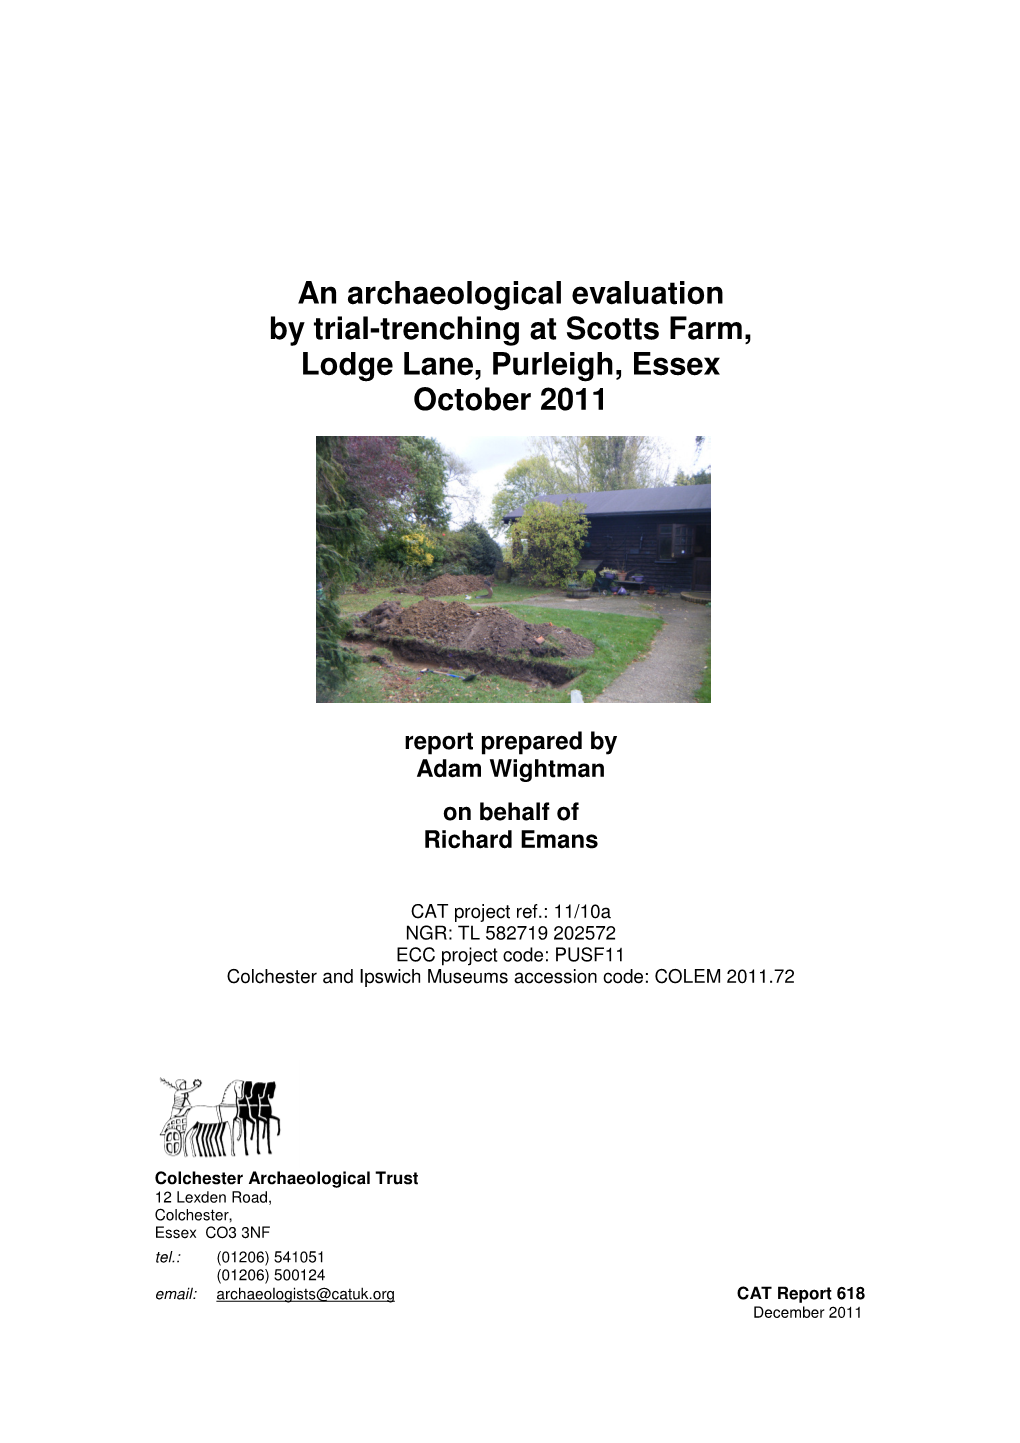 An Archaeological Evaluation by Trial-Trenching at Scotts Farm, Lodge Lane, Purleigh, Essex October 2011